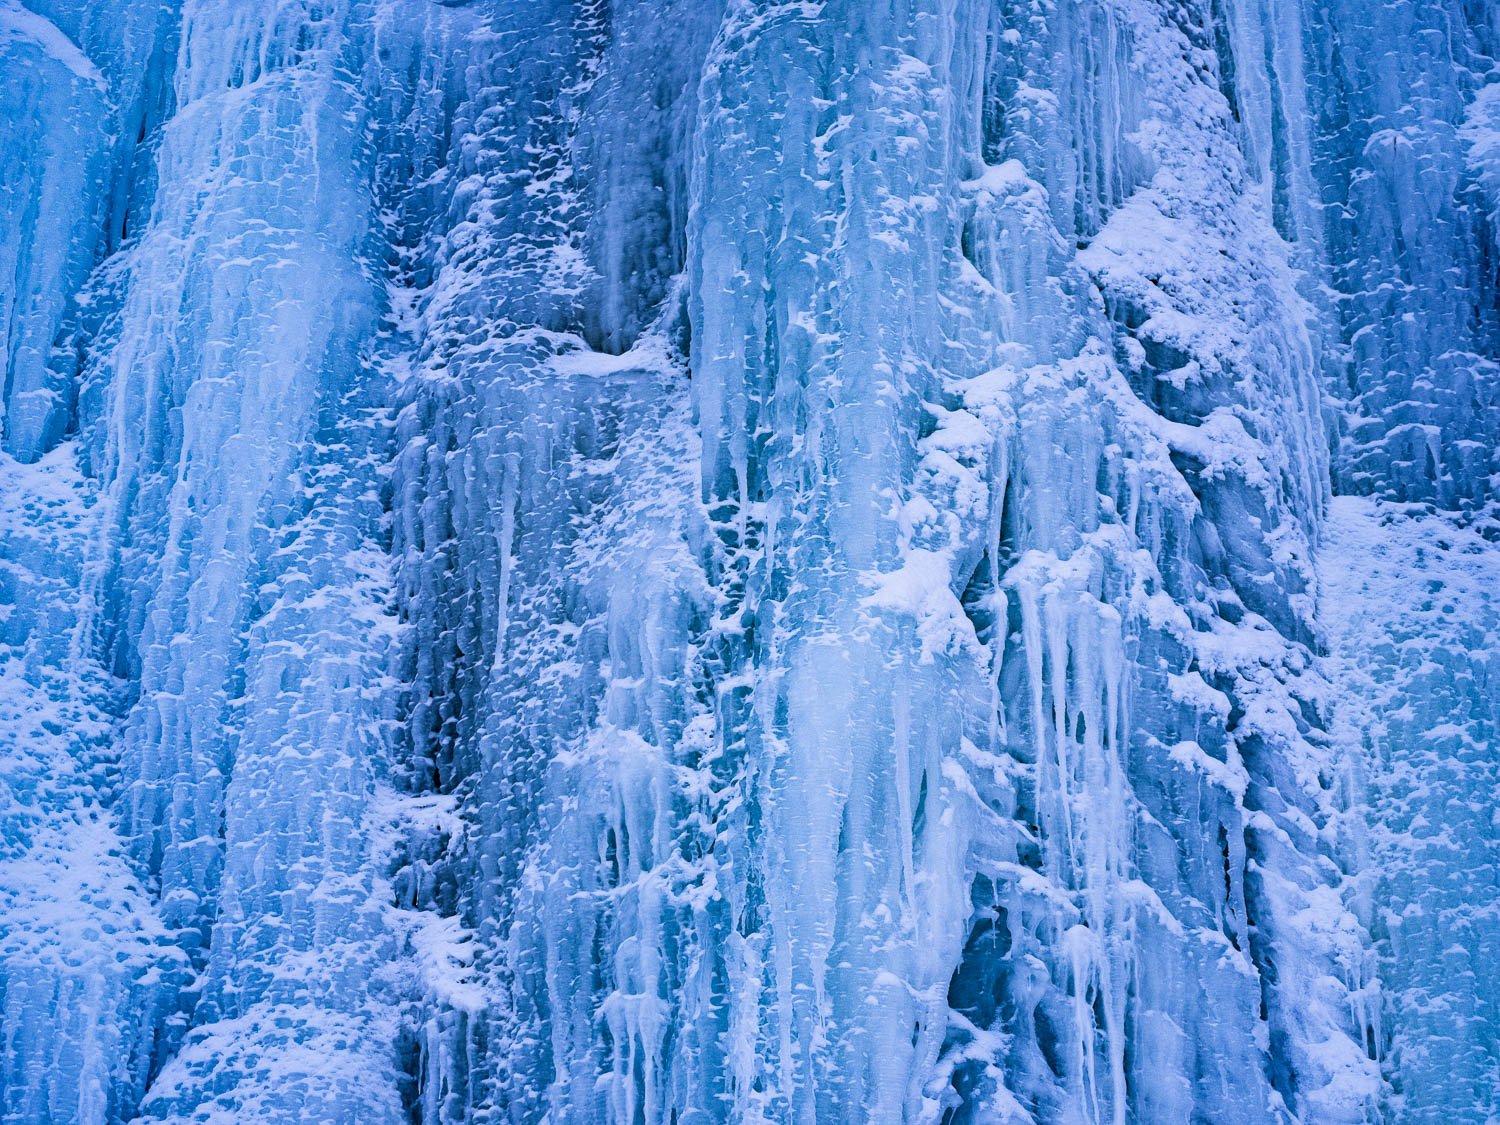 Crystalline solid mountain wall texture of ice-blue color, Sweden #15